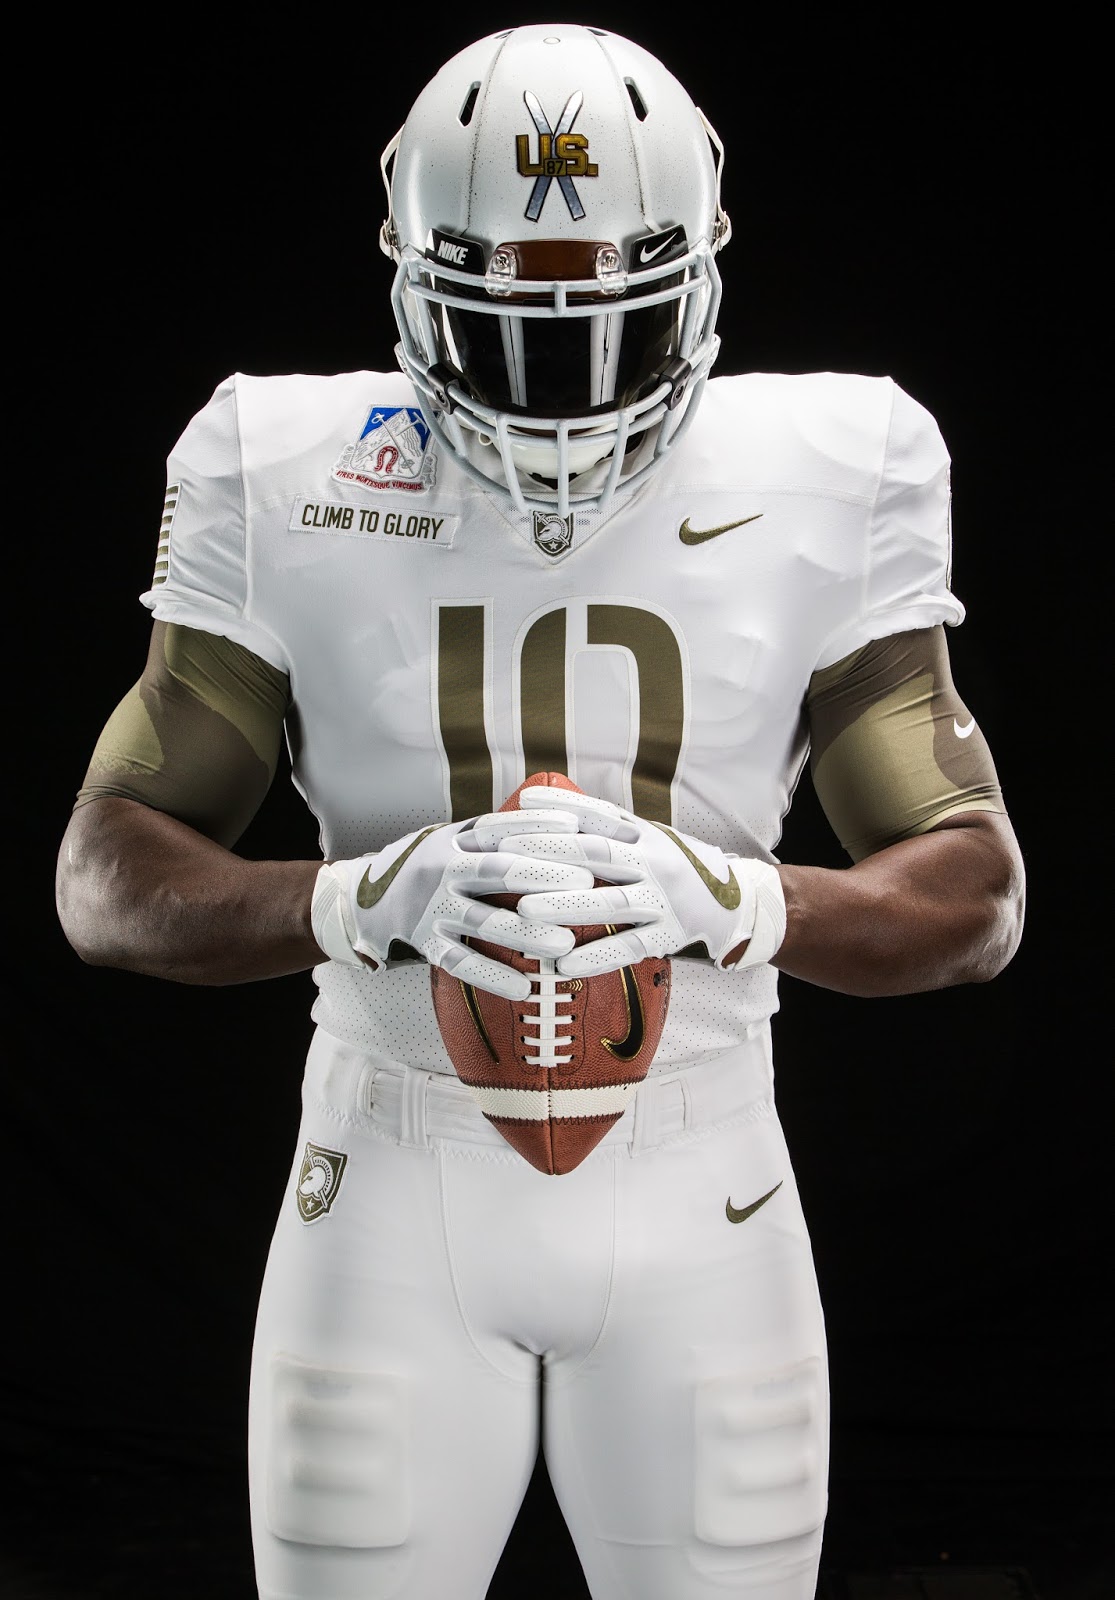 Army Unveils New Nike Uniforms for this Year’s ArmyNavy Game (Photos